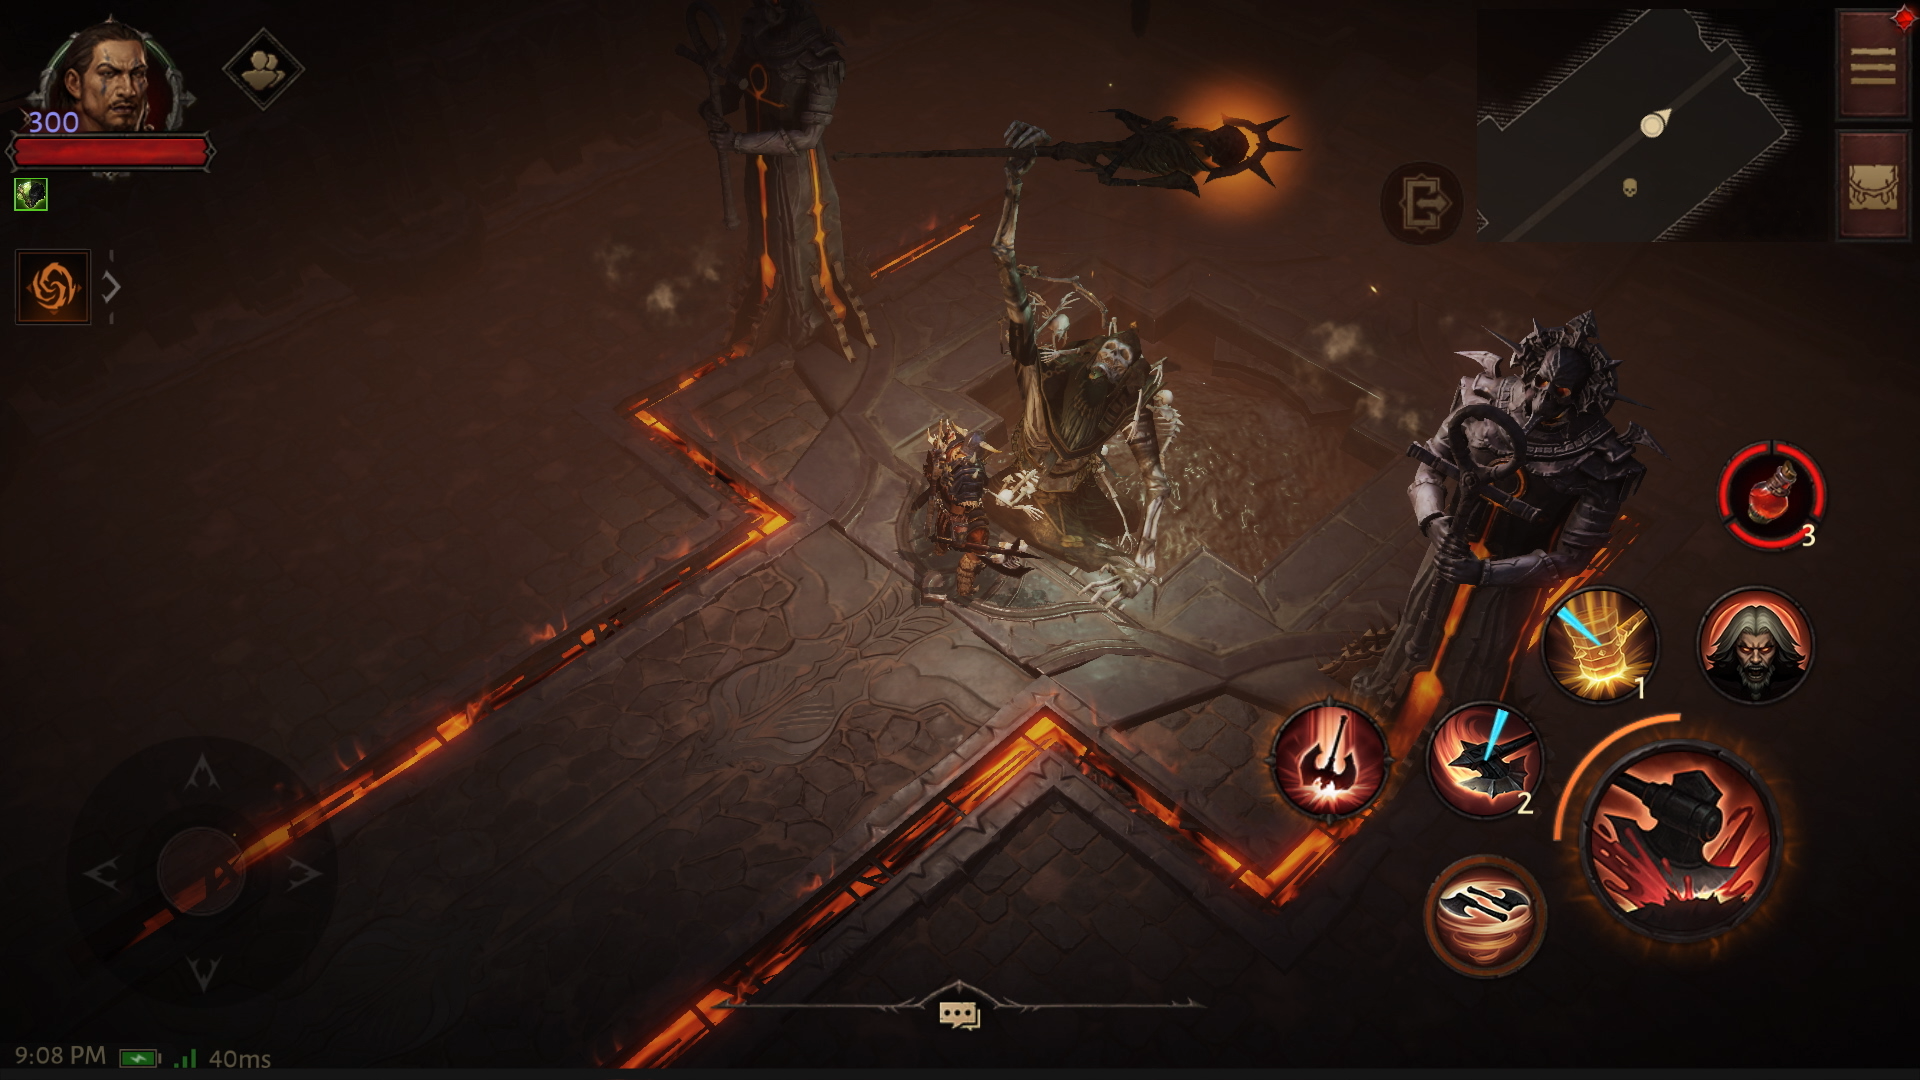 Want All the Fun of Diablo Immortal without Spending Hundreds of Dollars?  Try $25 Rift Simulator - Diablo Immortal - TapTap